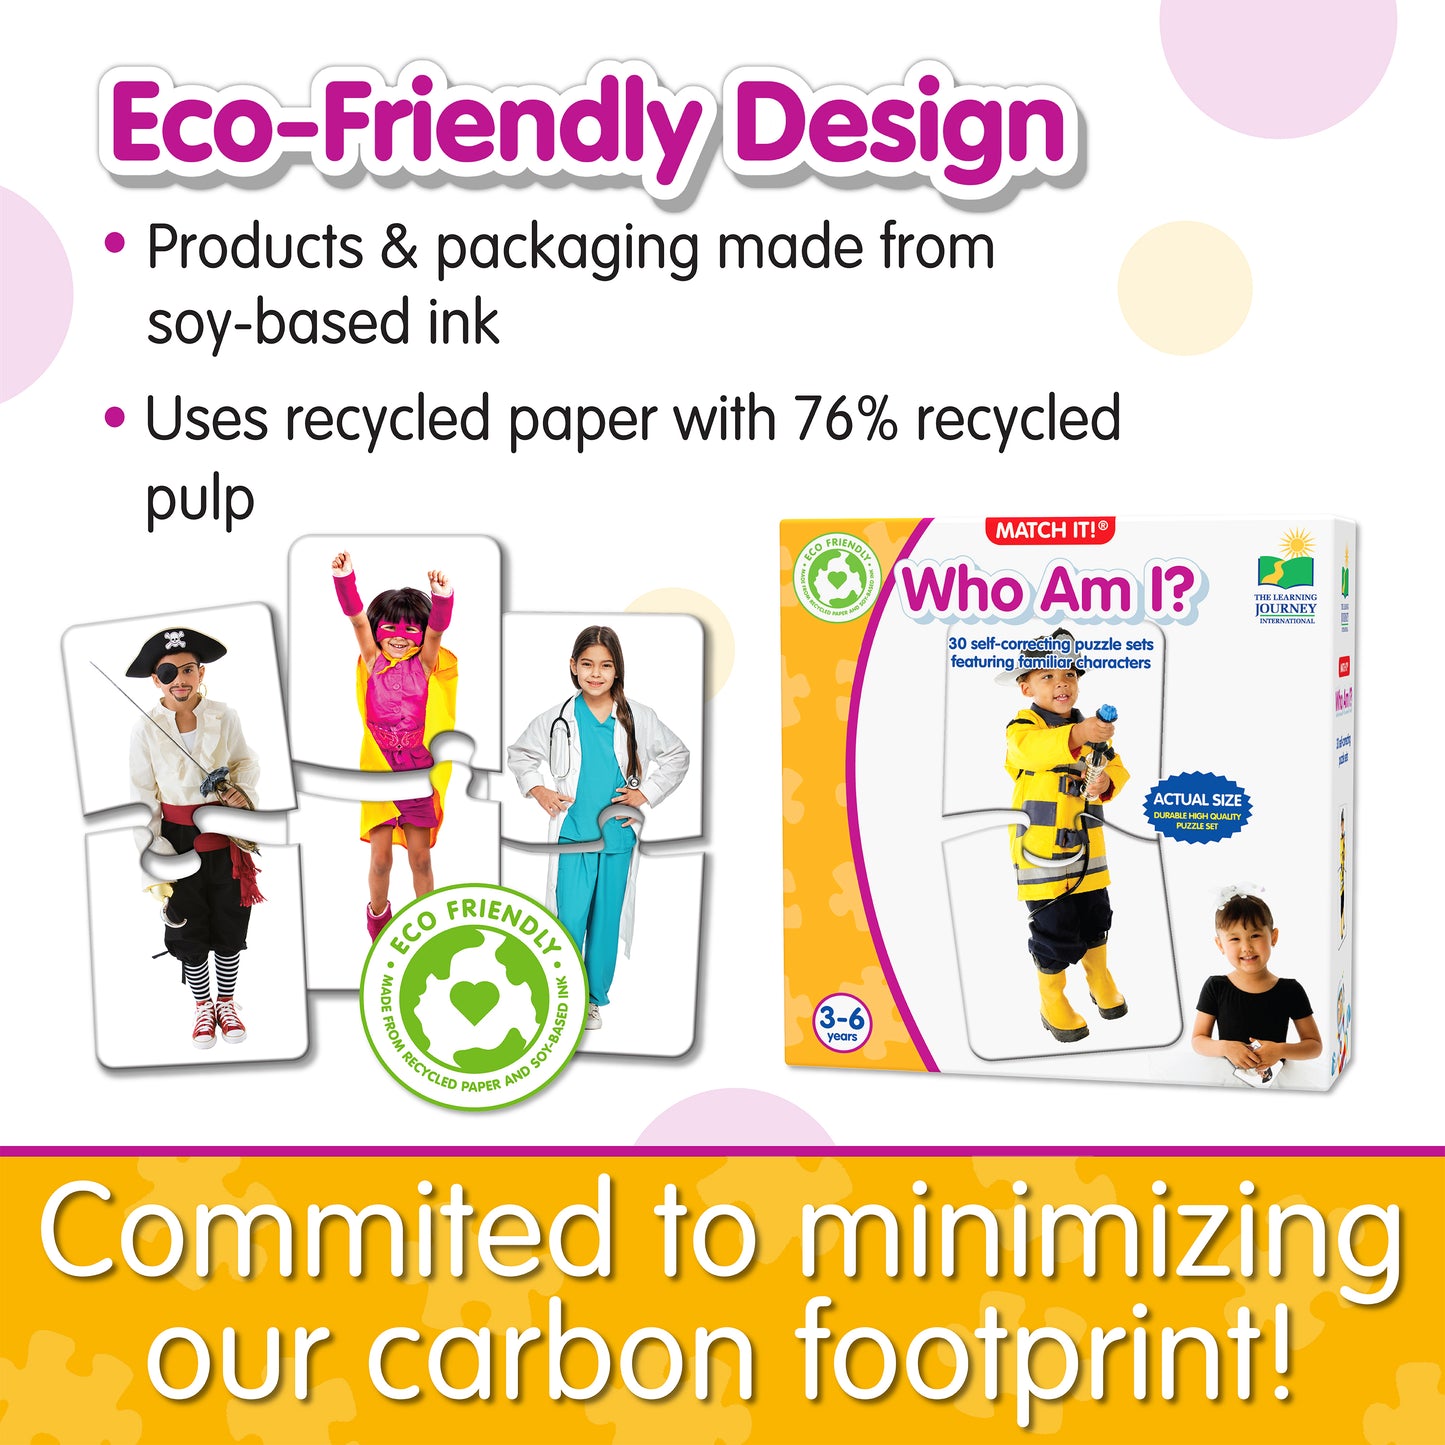 Infographic about Match It - Who Am I's eco-friendly design that says, "Committed to minimizing our carbon footprint!"